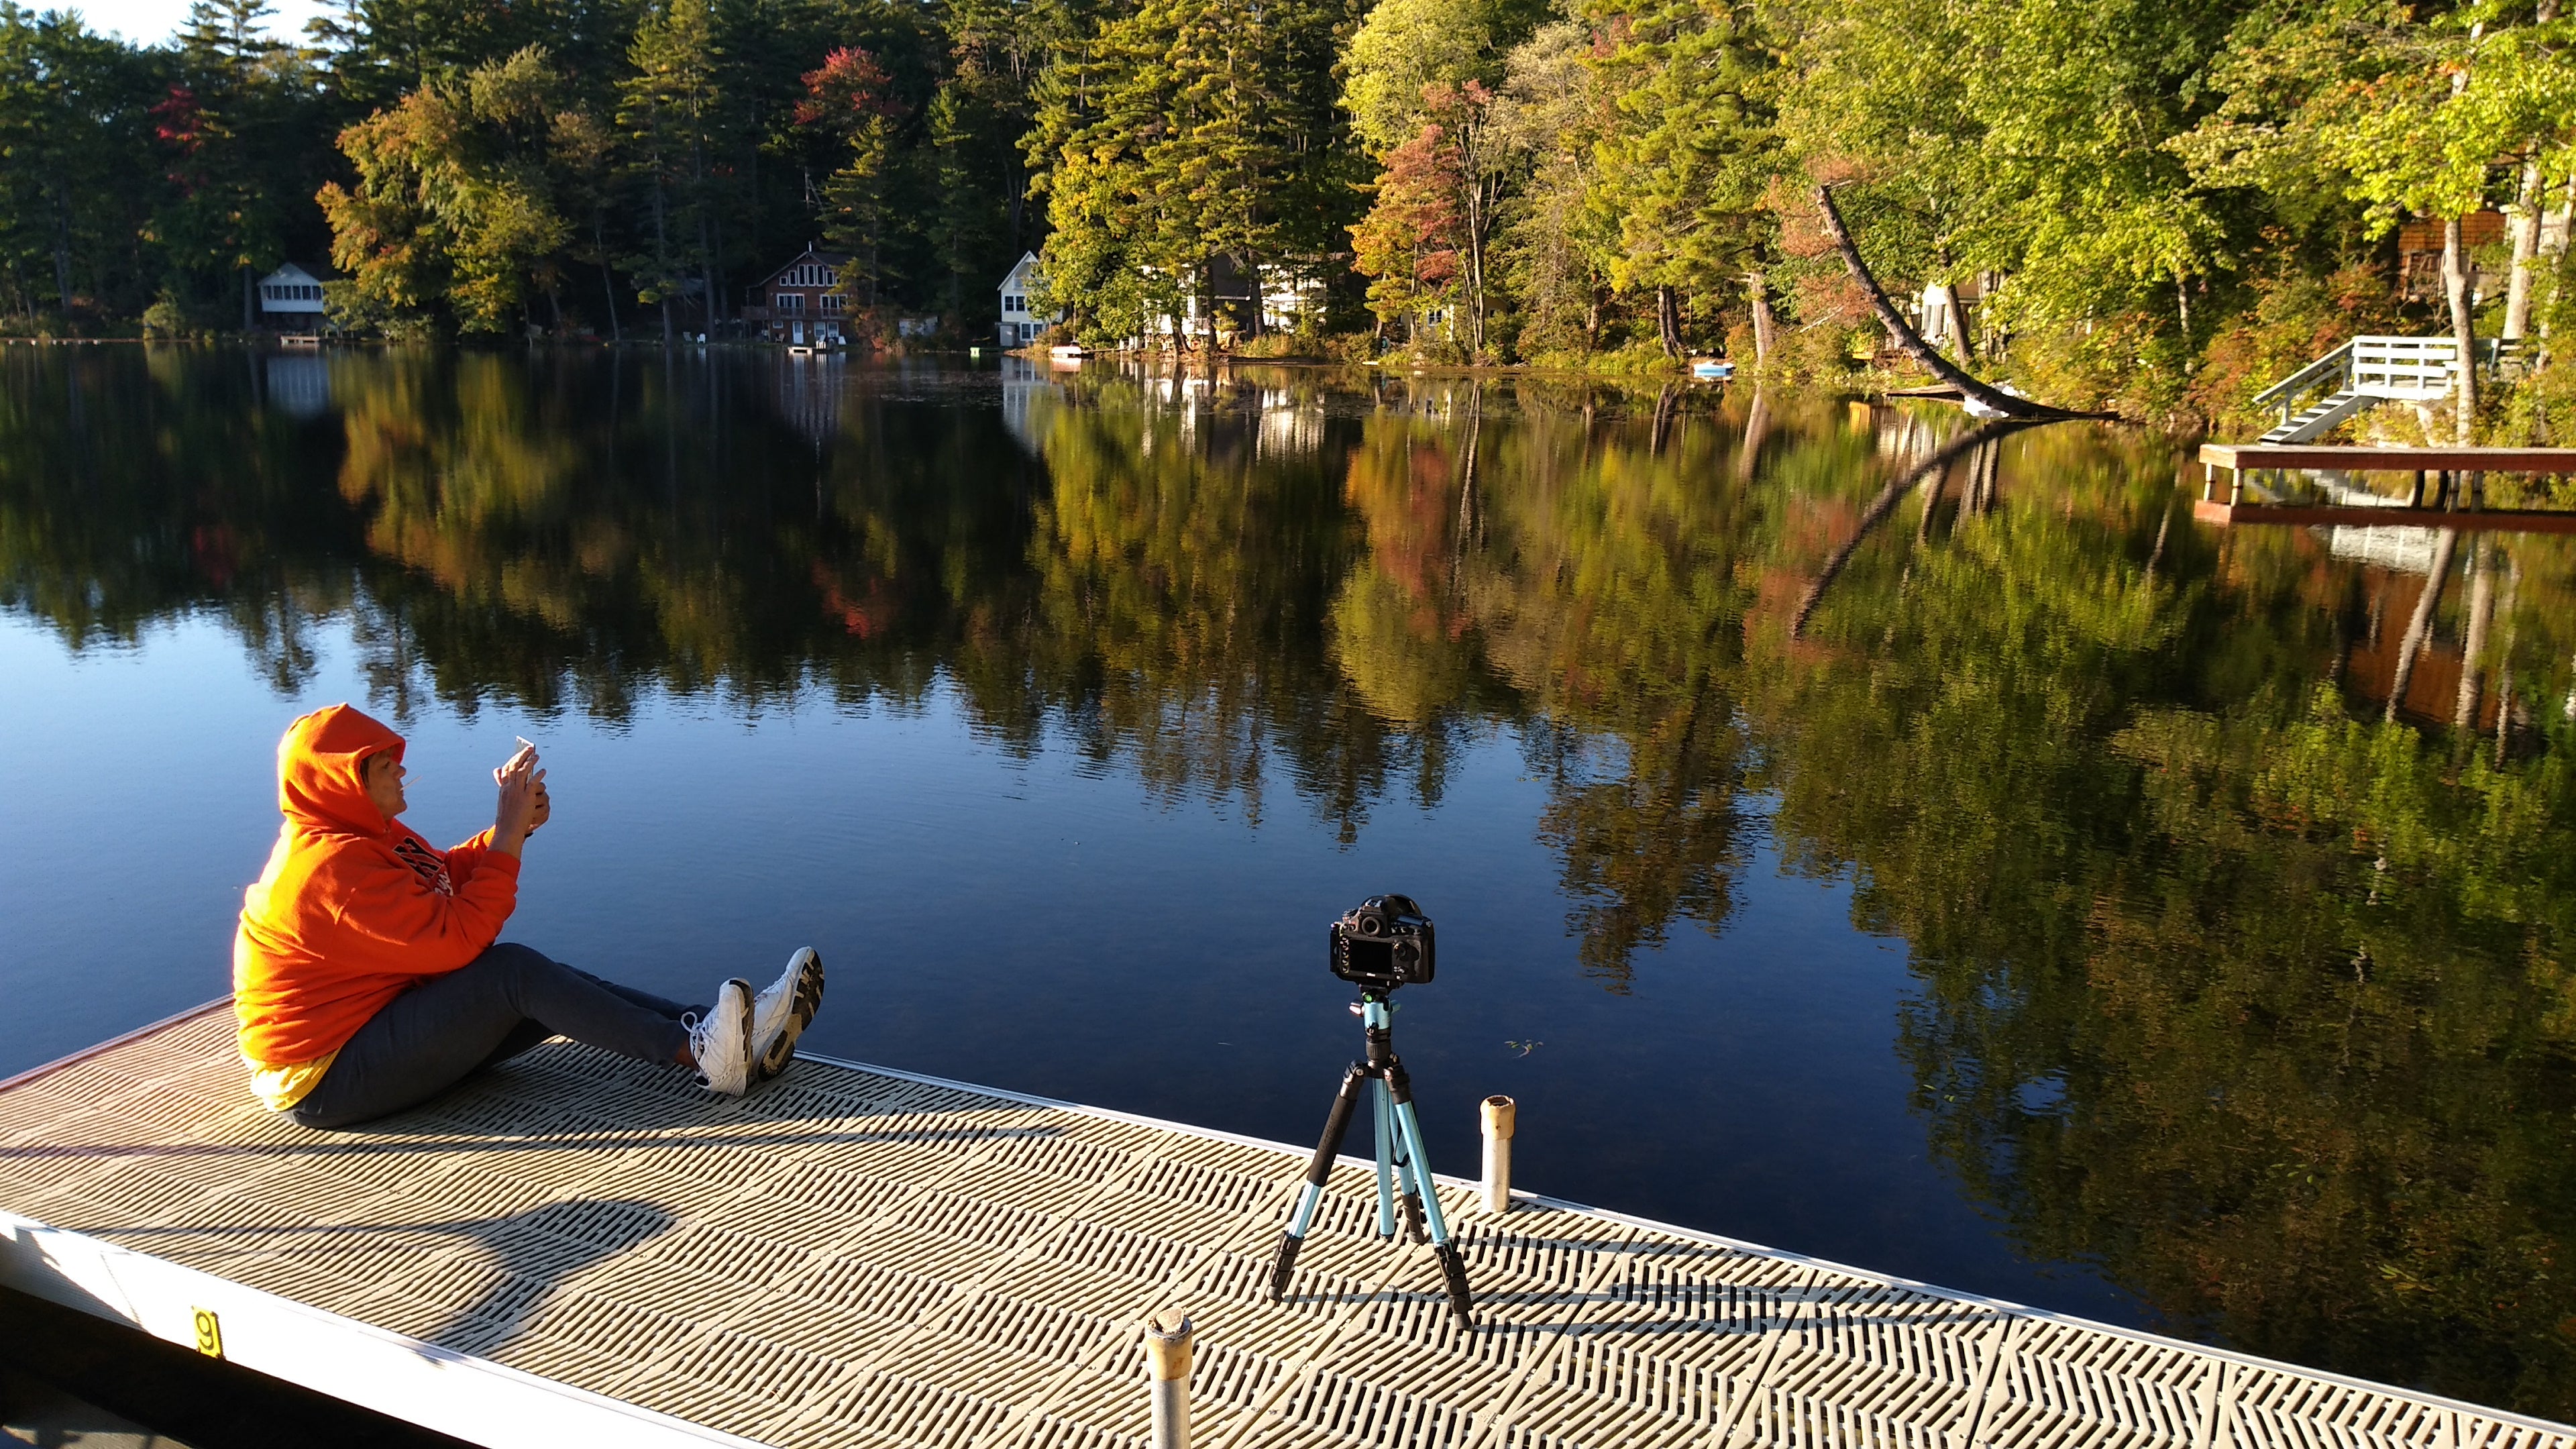 My wife sitting on the dock as I begin taking some foliage shots of the beautiful shoreline.